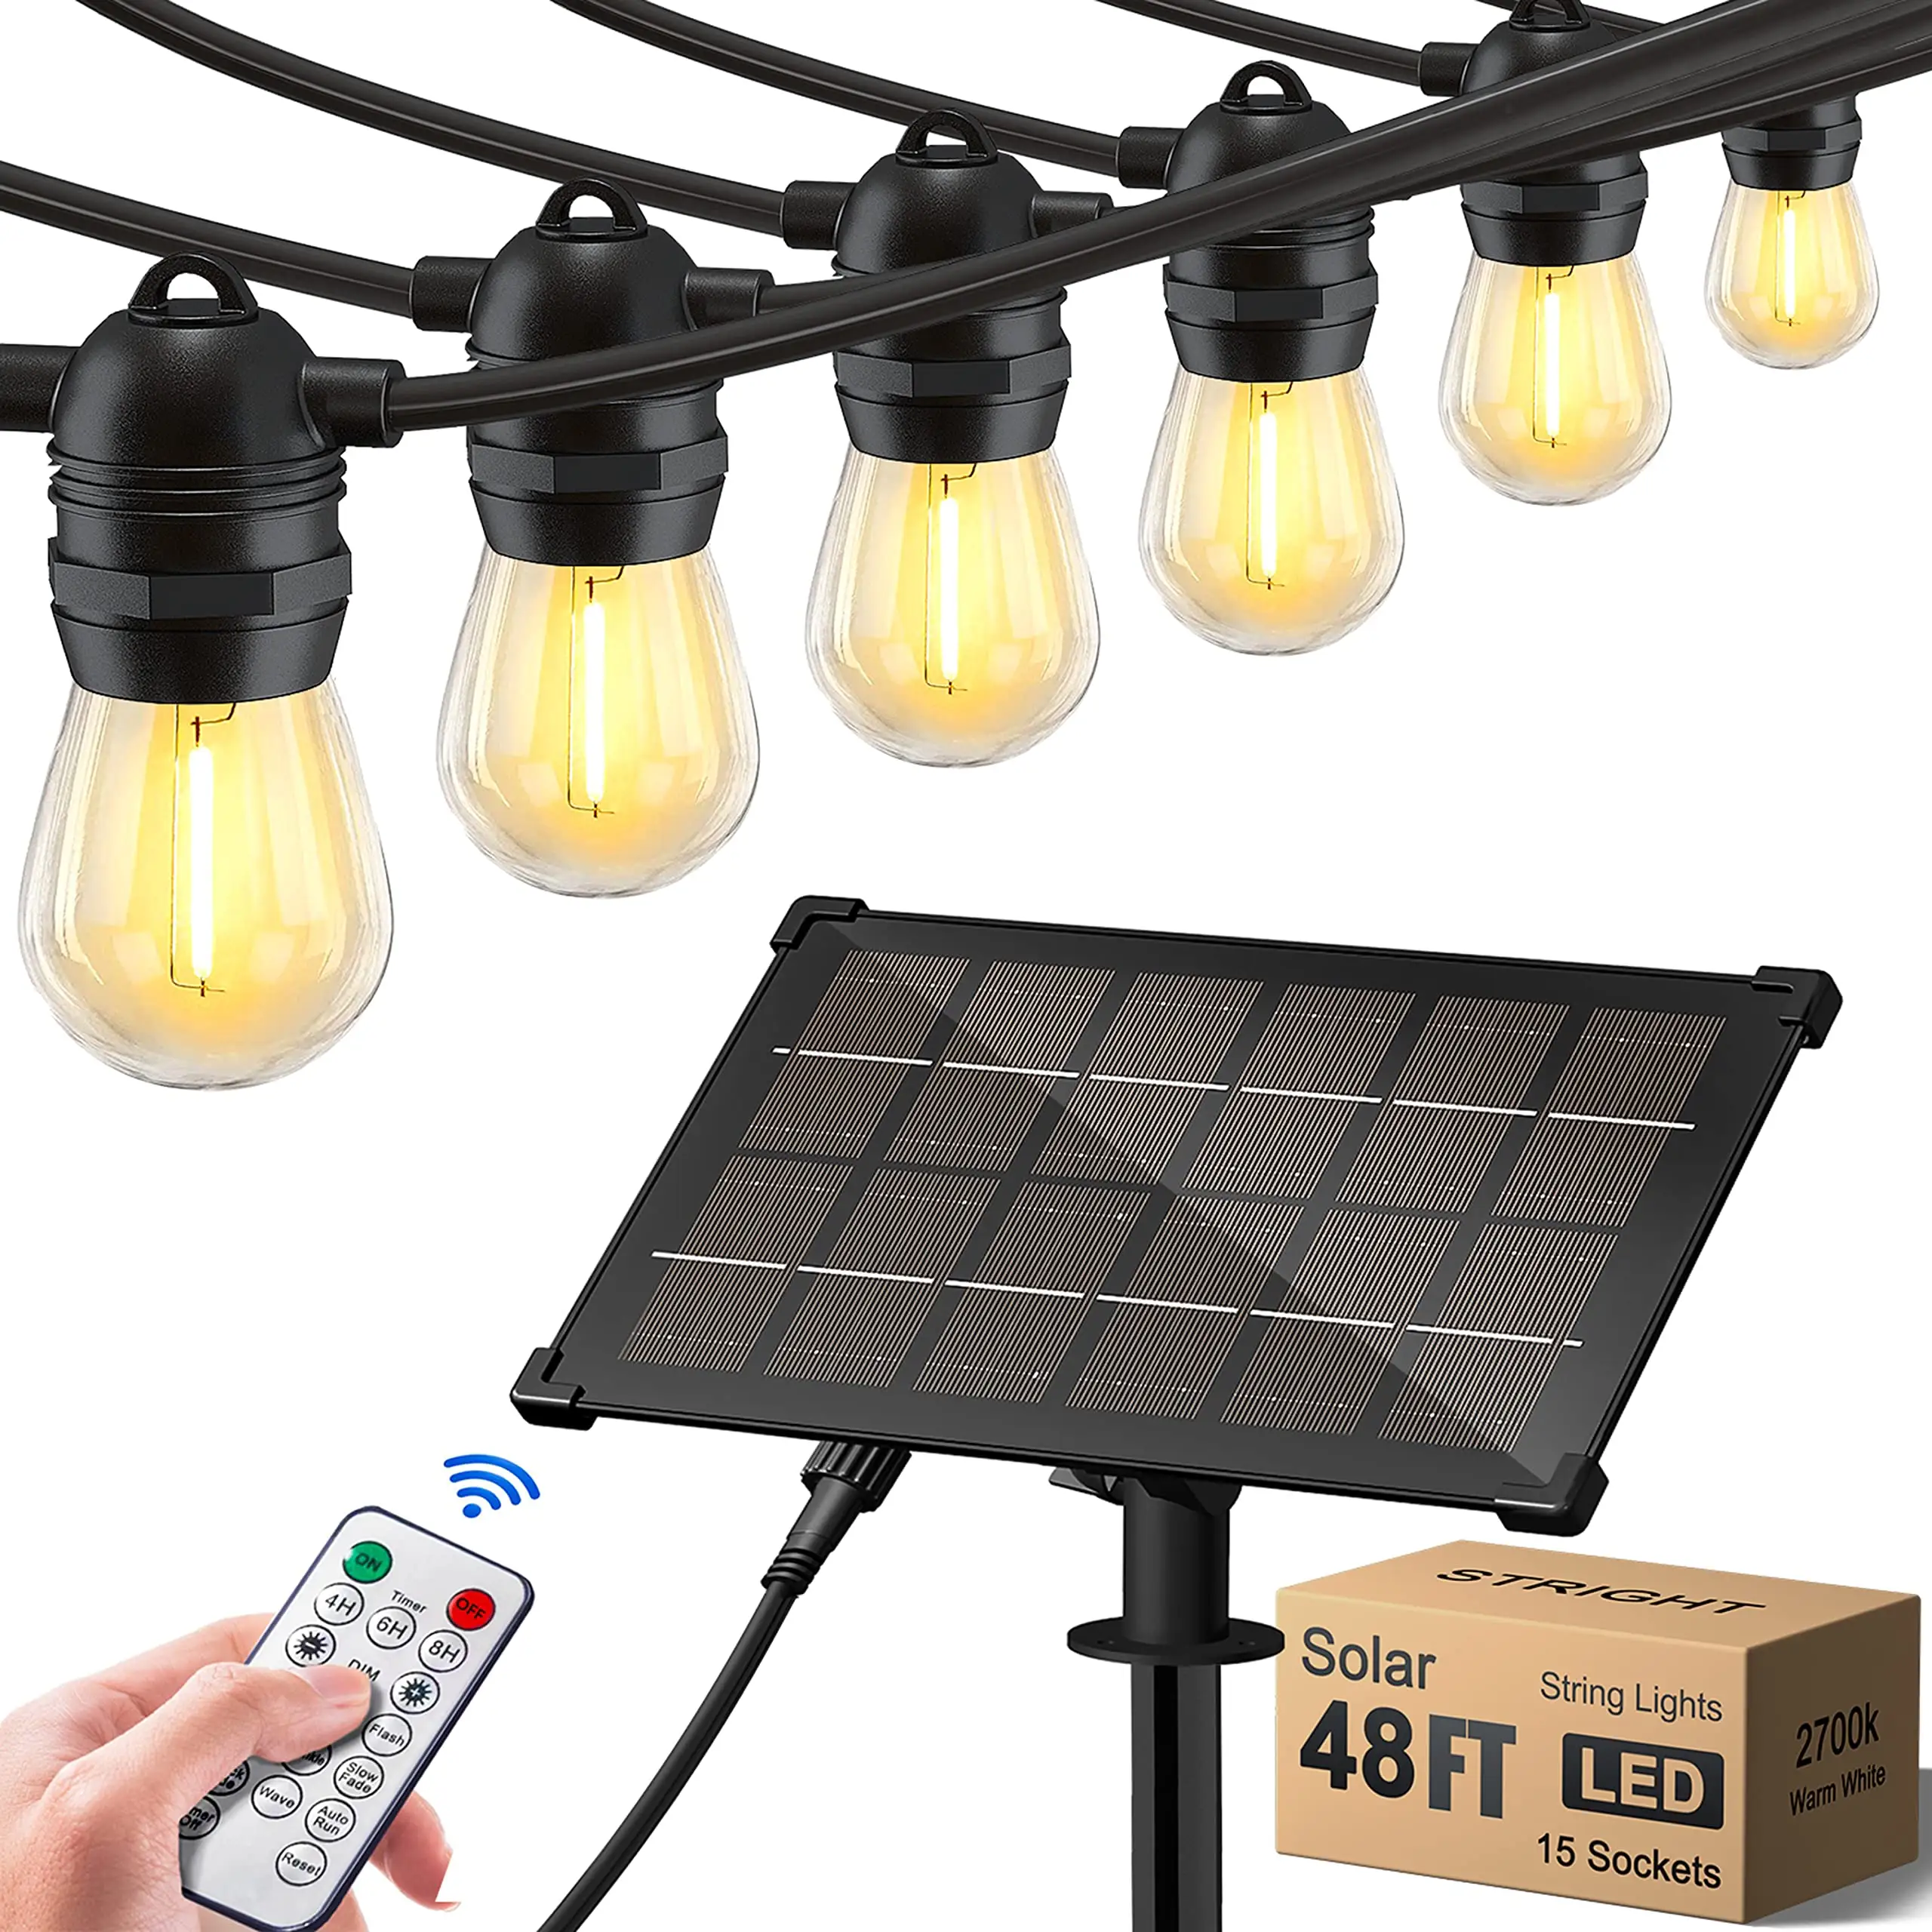 Solar String Lights with Remote Control and 8 Light Modes Weatherproof S14 LED Bulb Outdoor Strand Patio Light